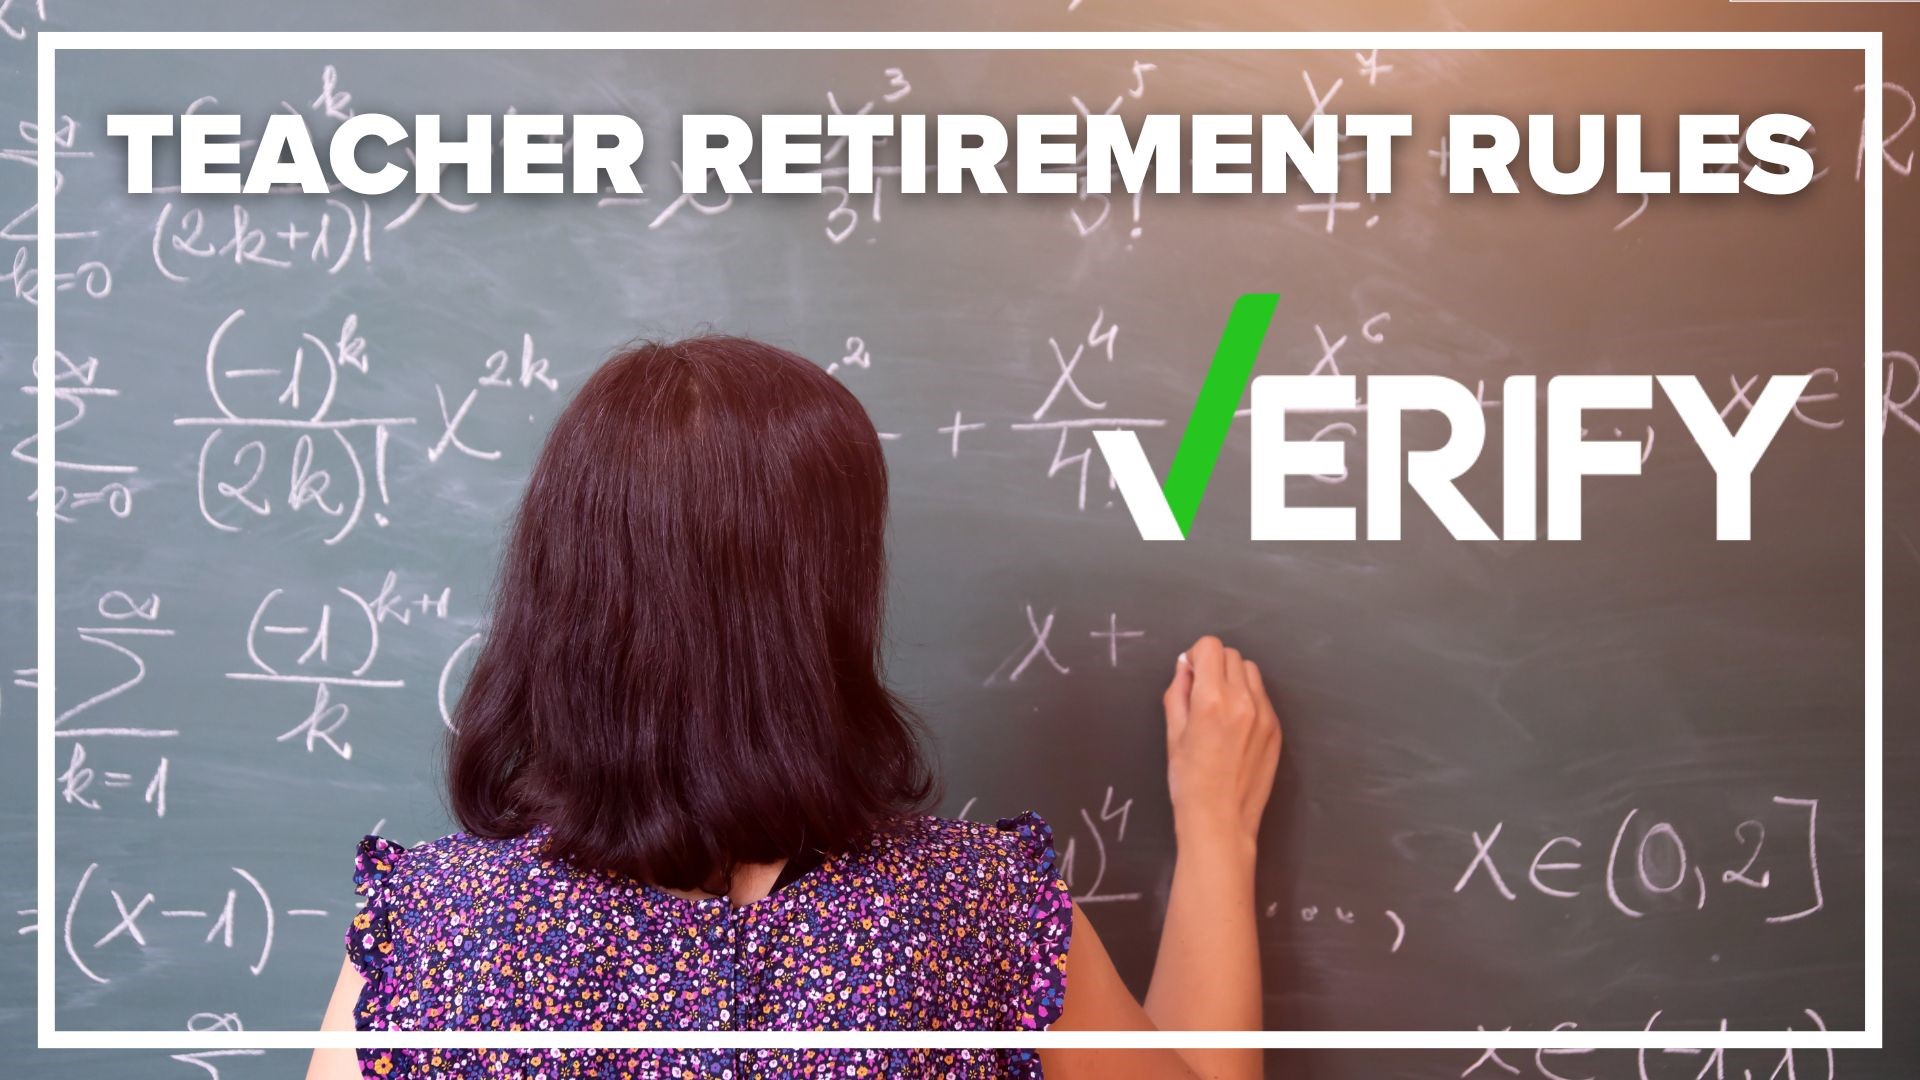 As districts across the Carolinas face labor shortages, can retired teachers return to the classroom and keep their retirement benefits?